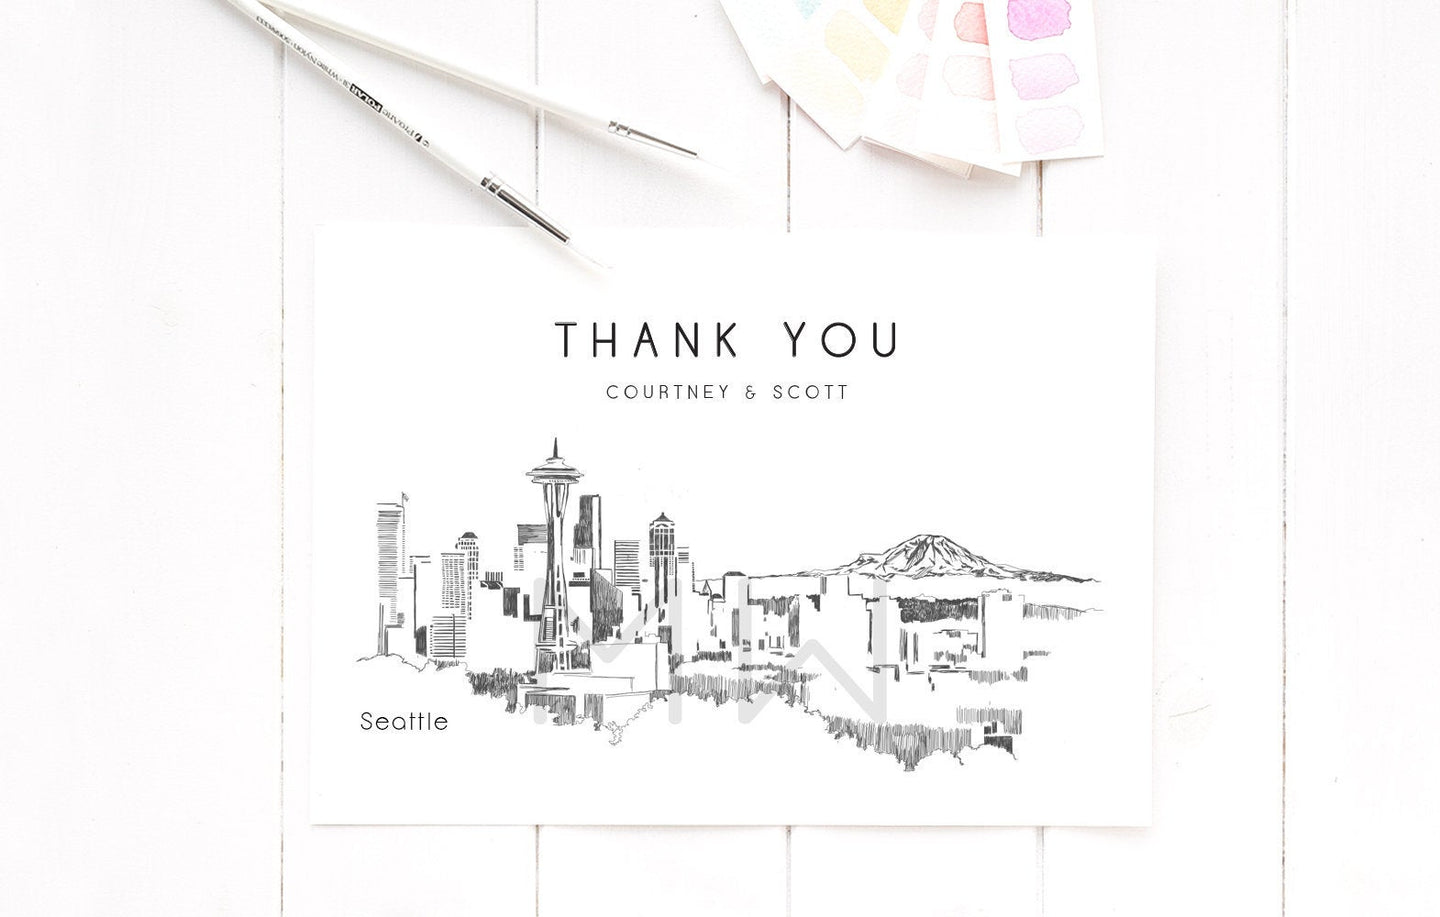 Seattle Skyline Thank You Cards, Personal Note Cards, Bridal Shower Thank you Card Set, Corporate Thank you Cards (set of 25 cards)